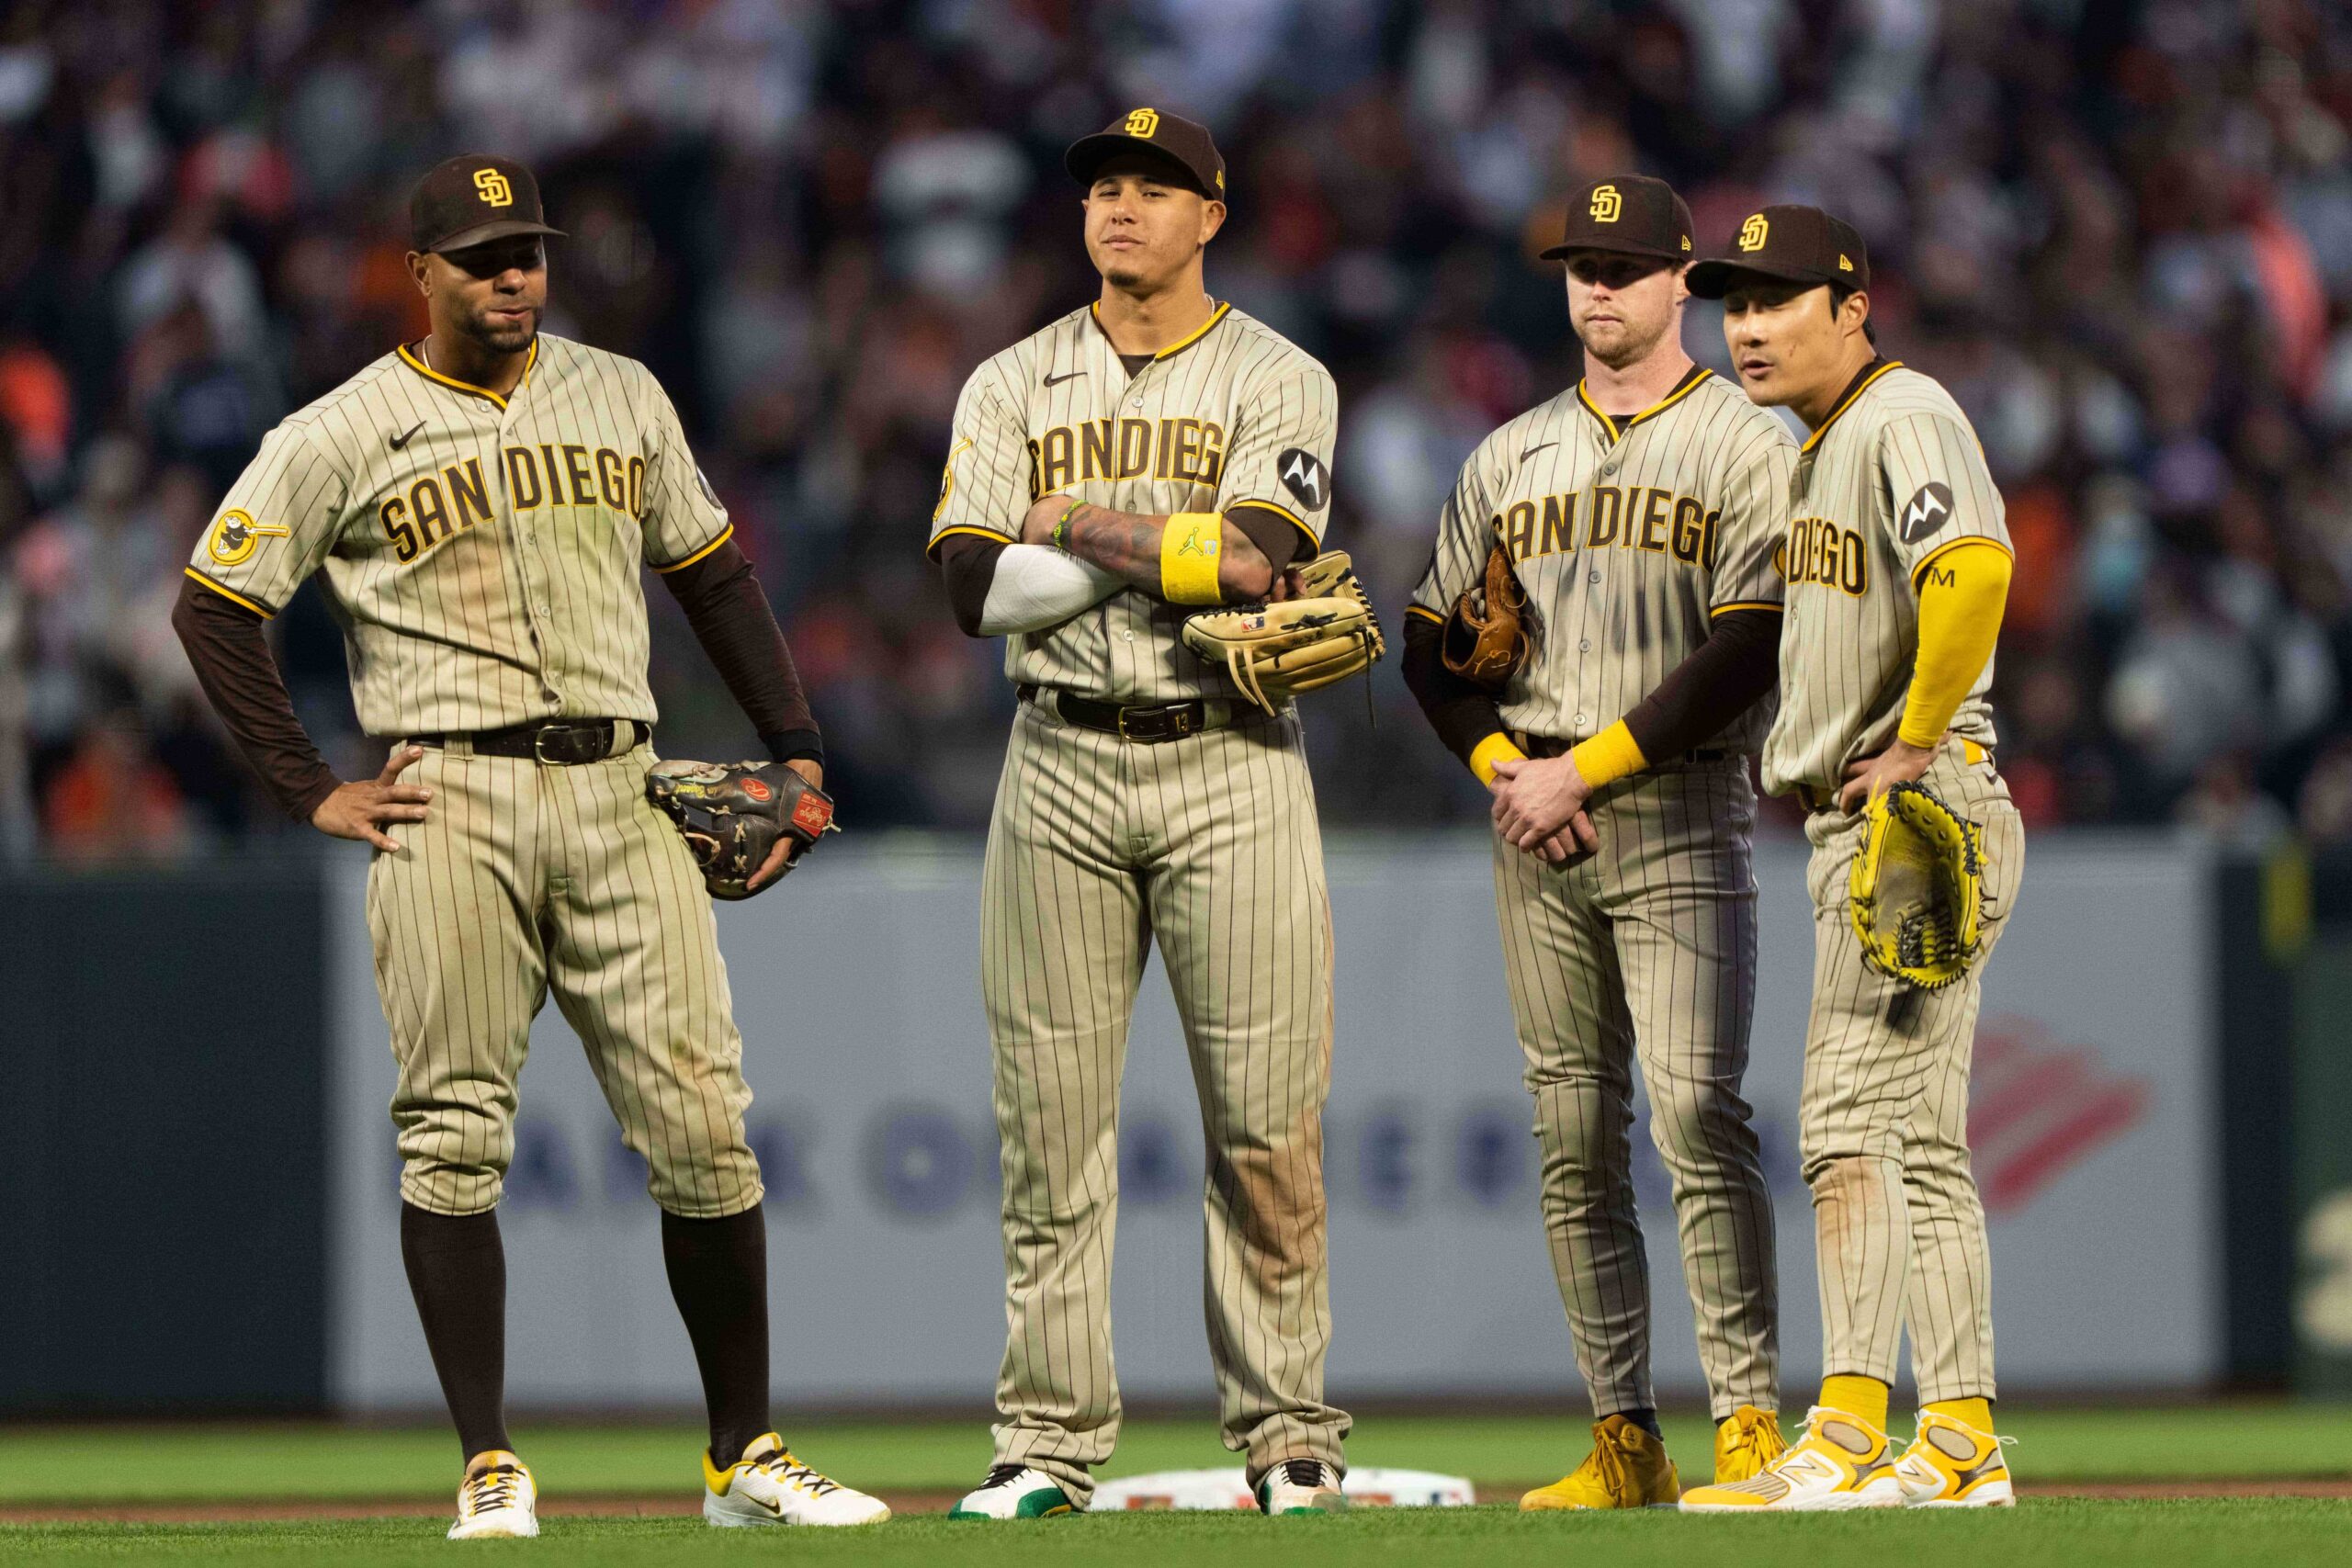 San Diego Padres rank 9th most 'hated' MLB team